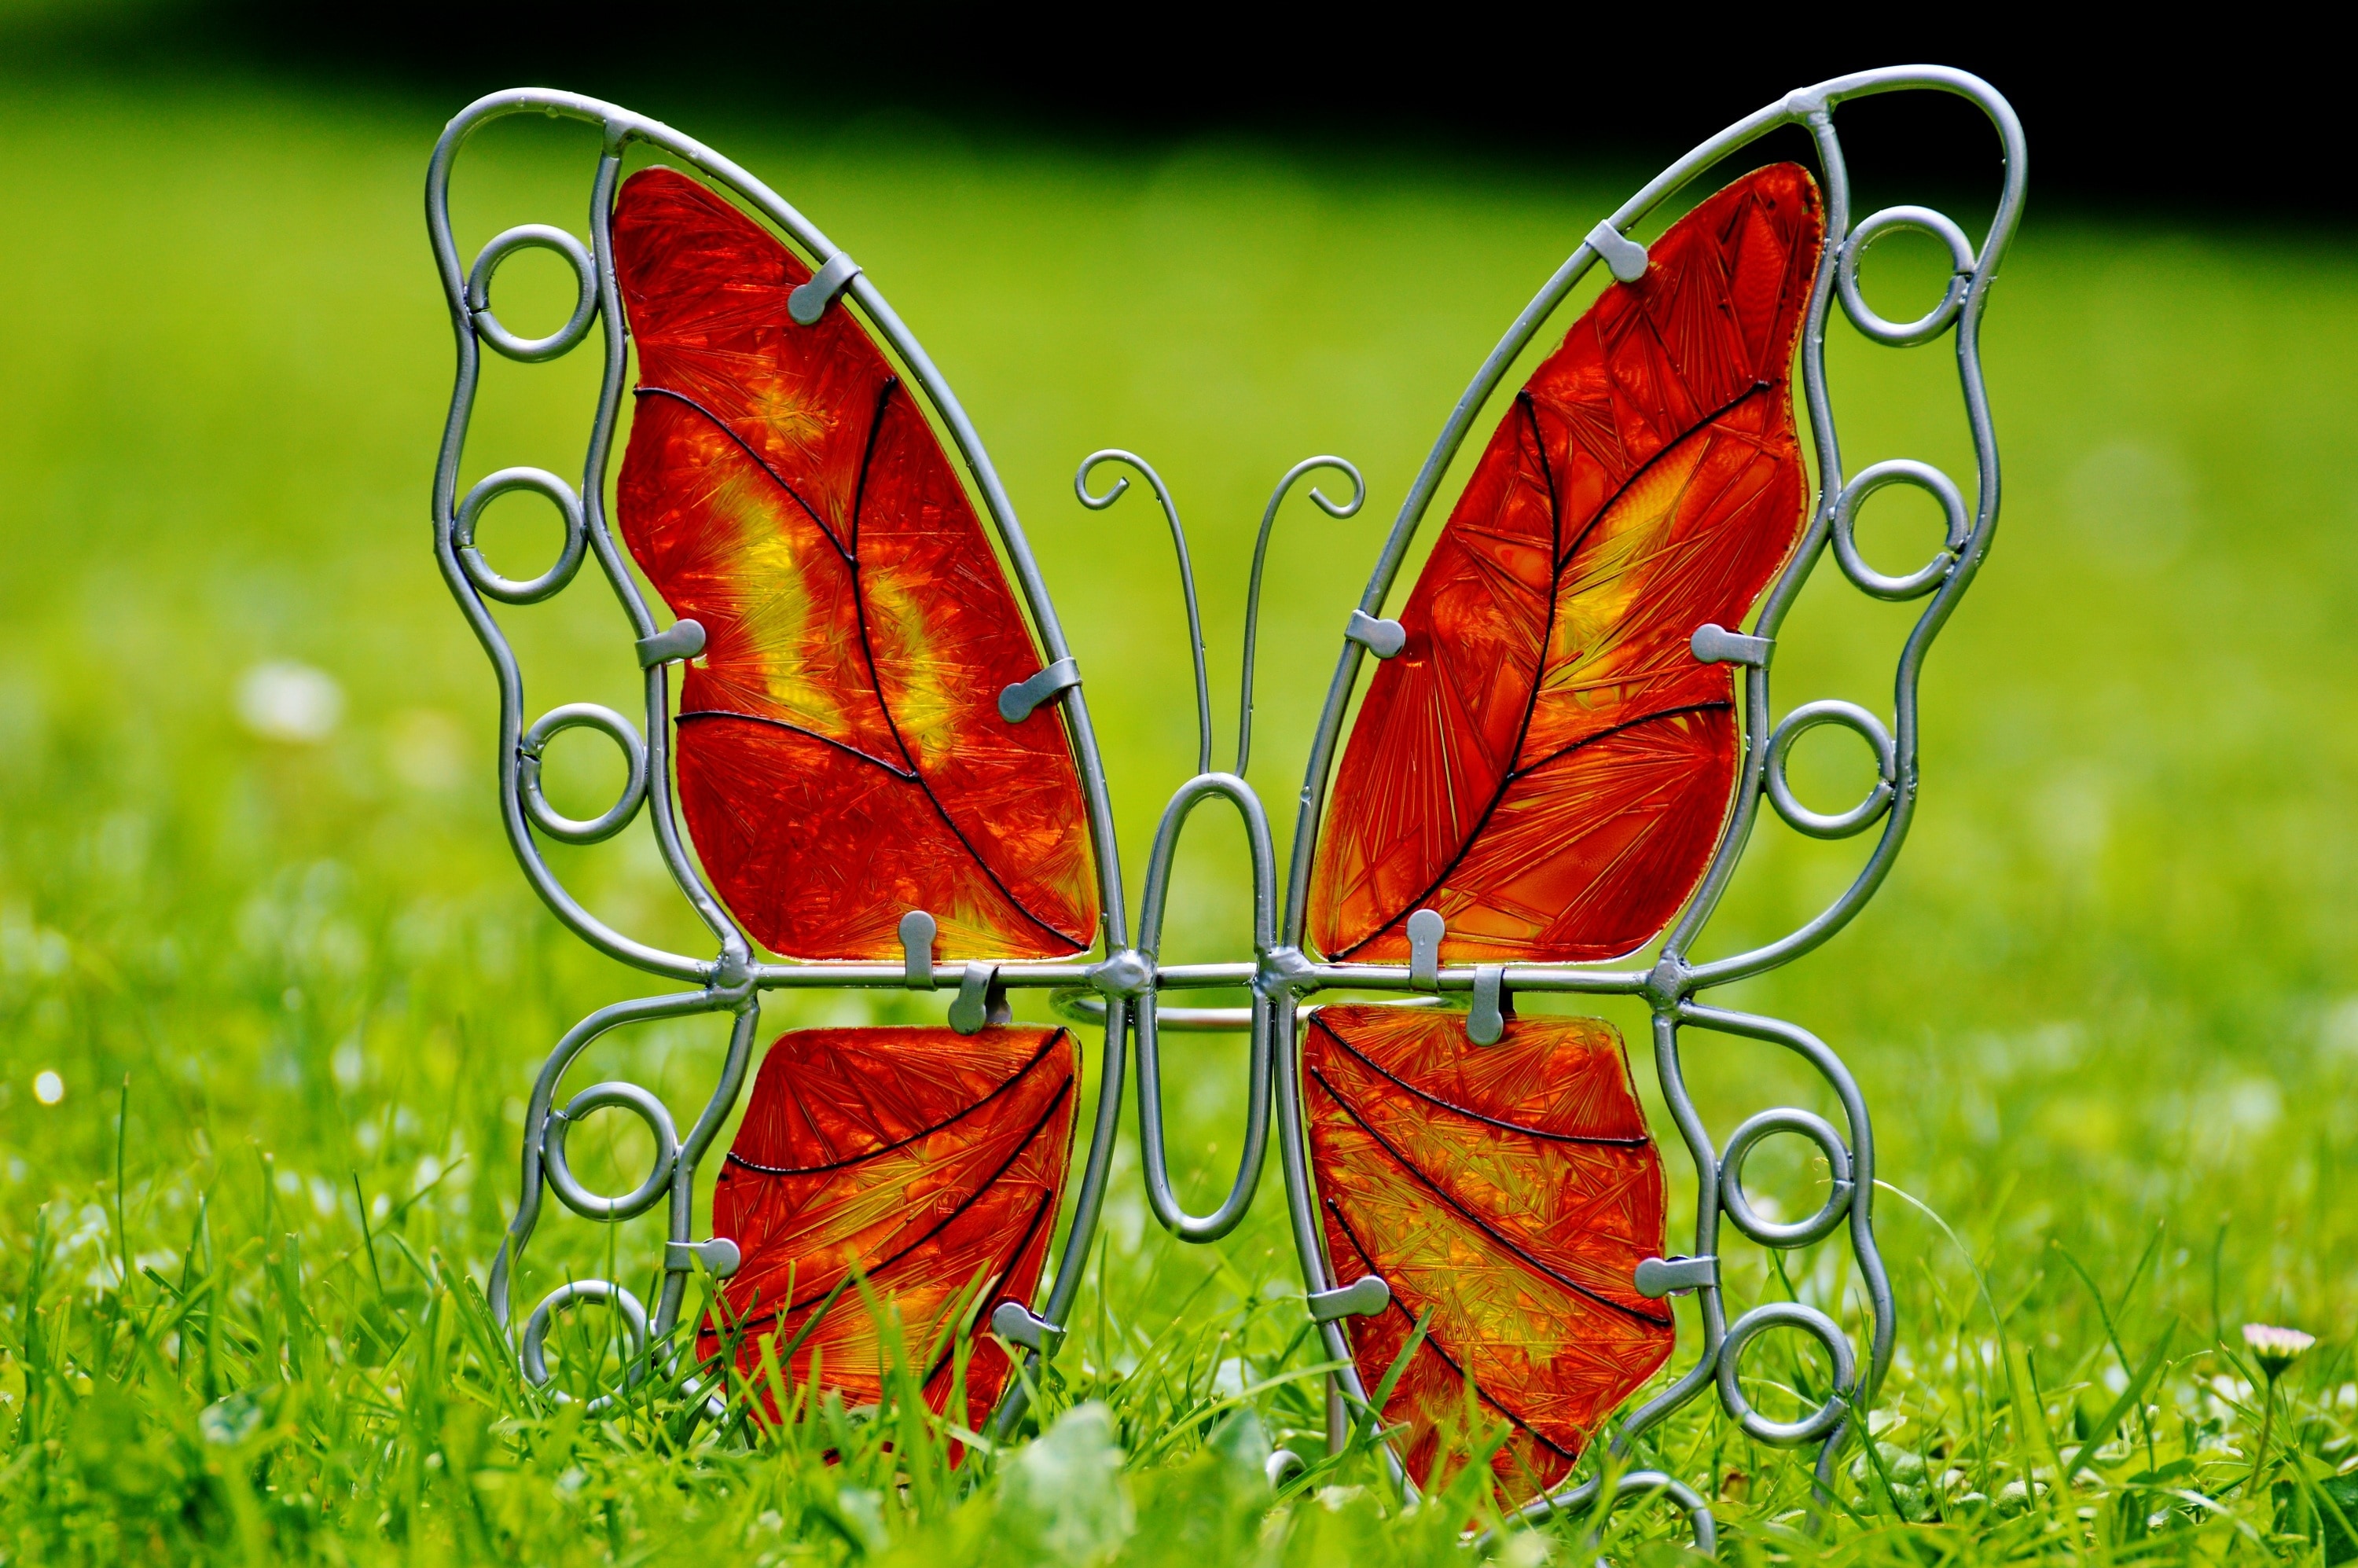 Butterfly, Metal, Decoration, Glass, grass, green color